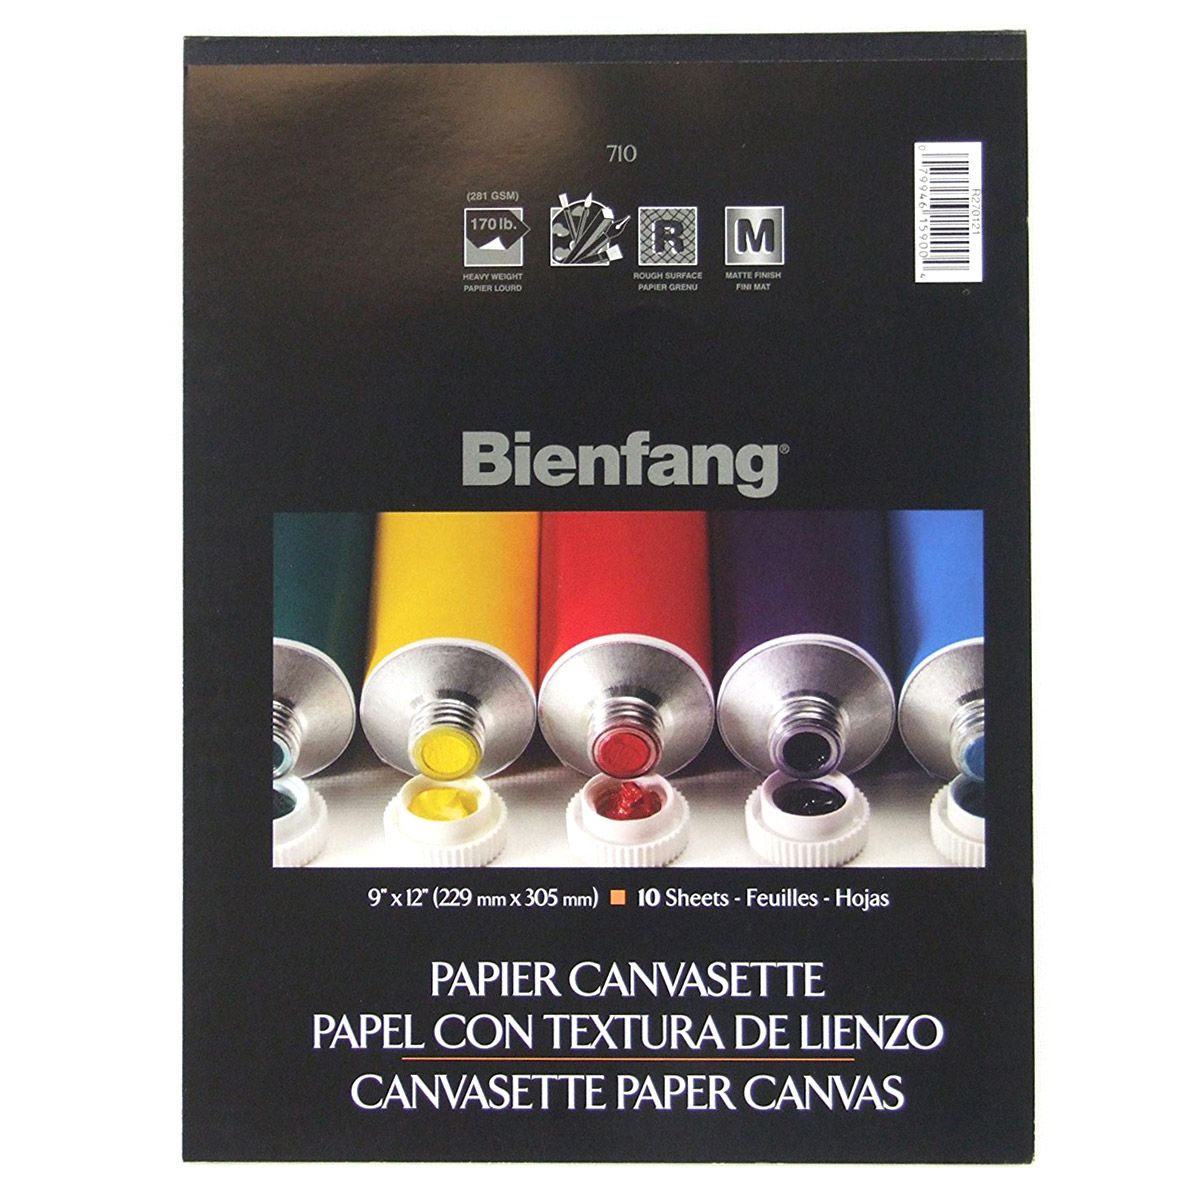 Bienfang Canvasette Paper 10-Sheet Pad, 9 x 12 inches